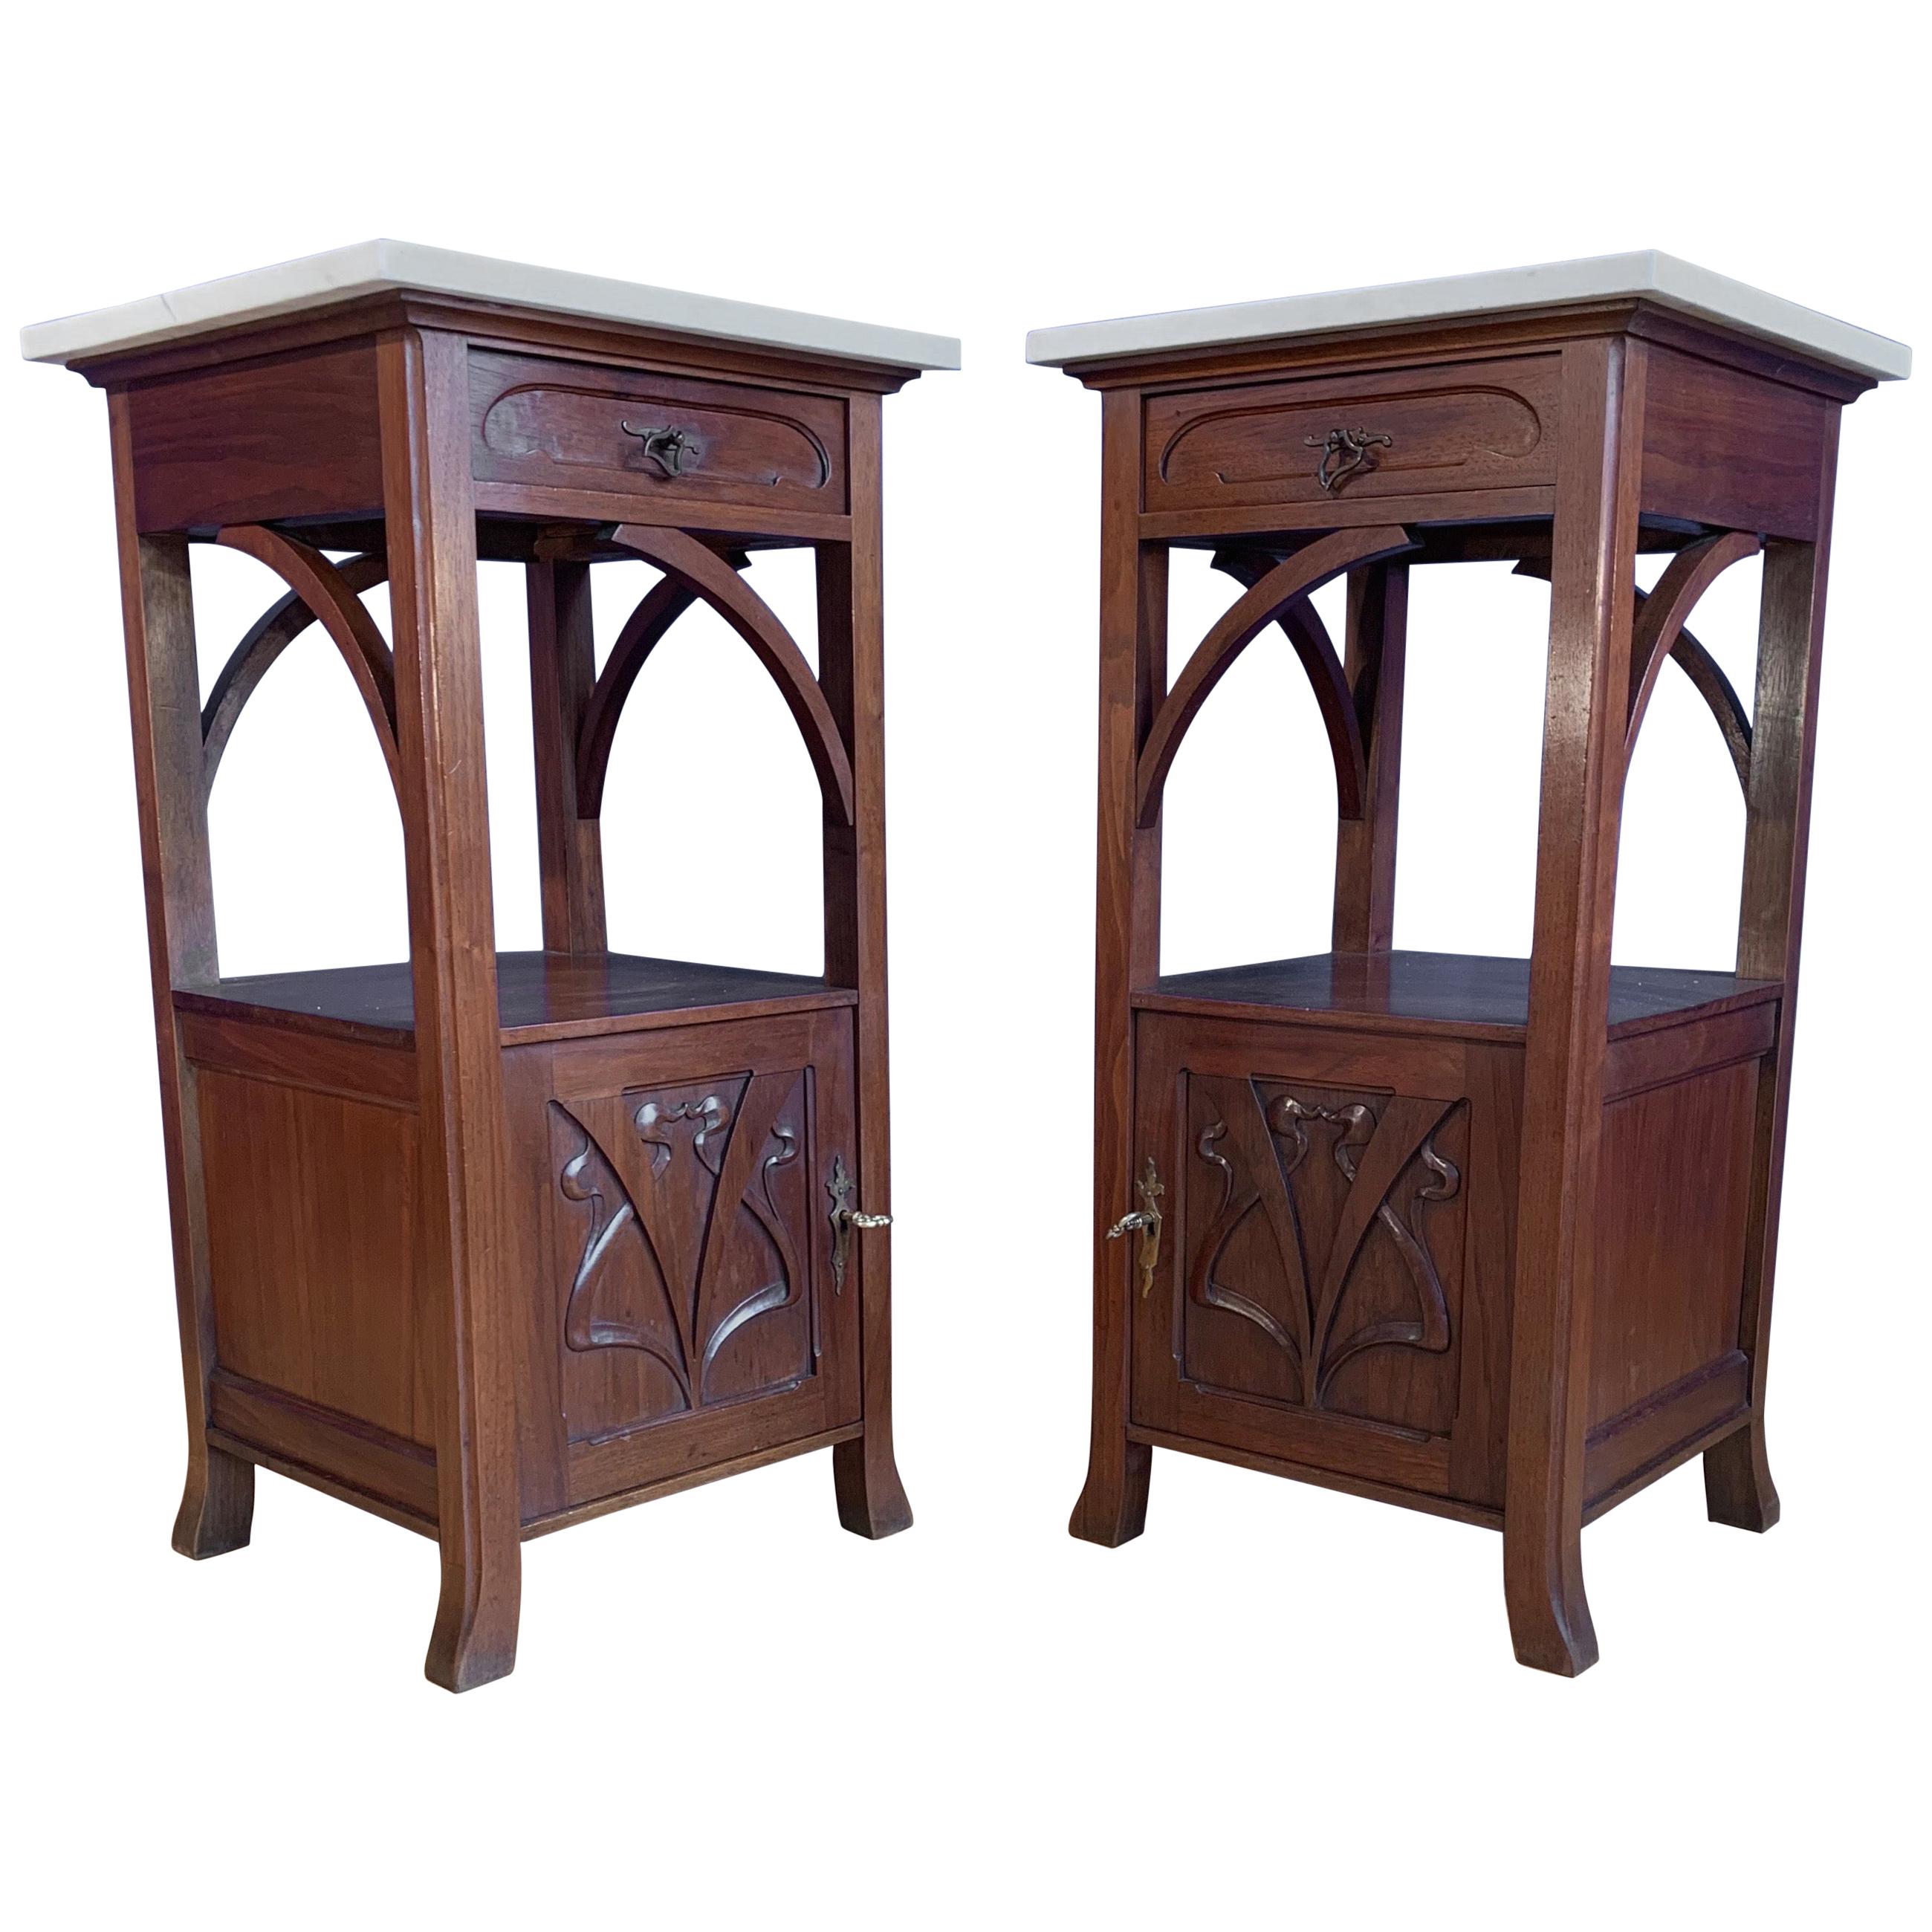 Stunning Pair of Art Nouveau Mahogany Nightstands / Bedside Cabinets Marble Tops